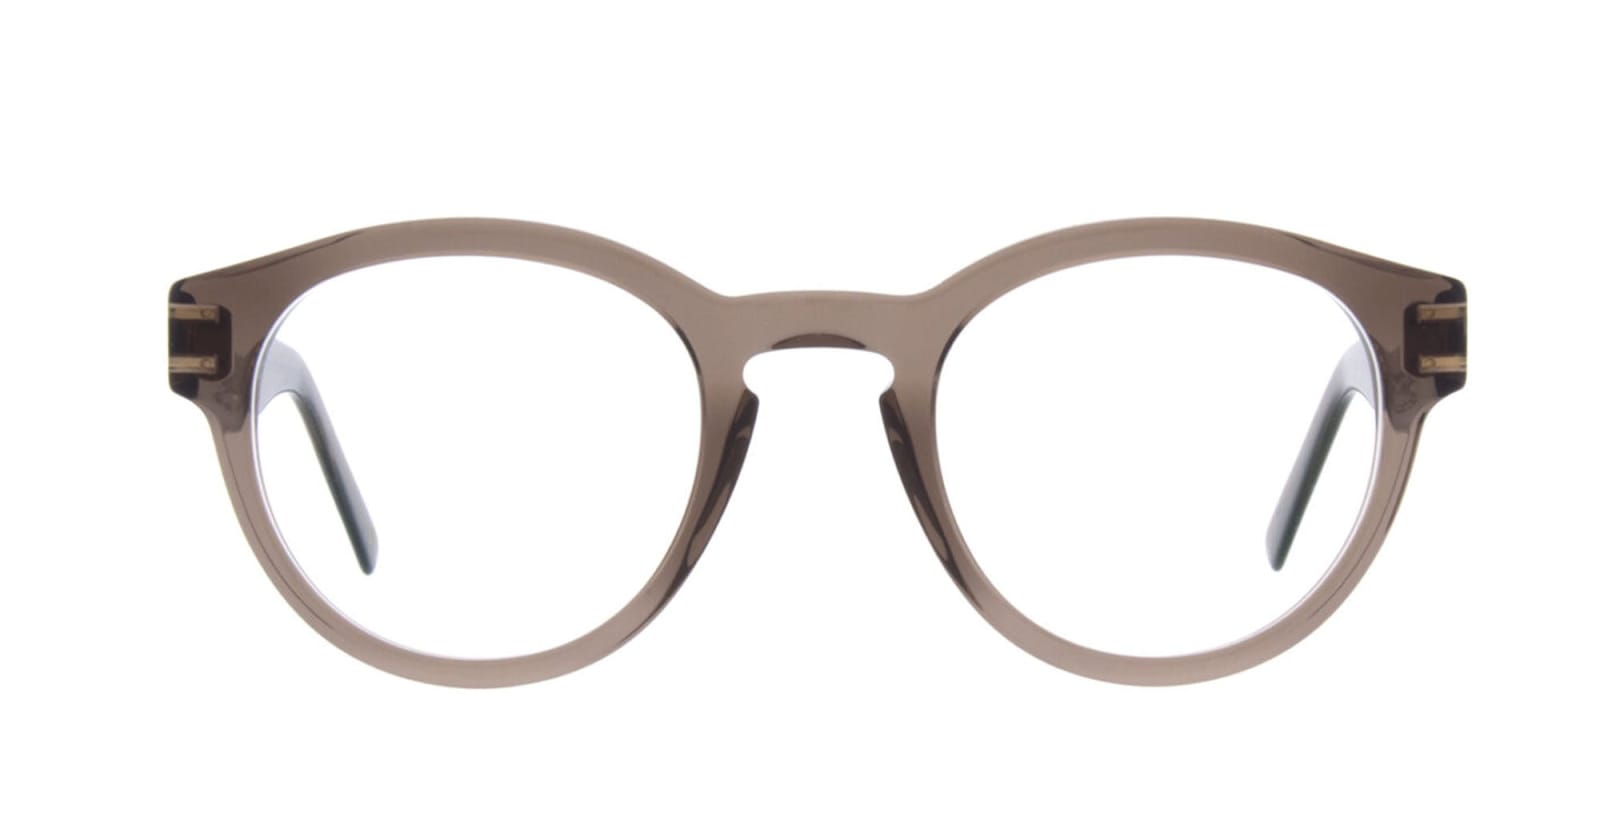 Andy Wolf Aw03 - Brown / Gold Glasses